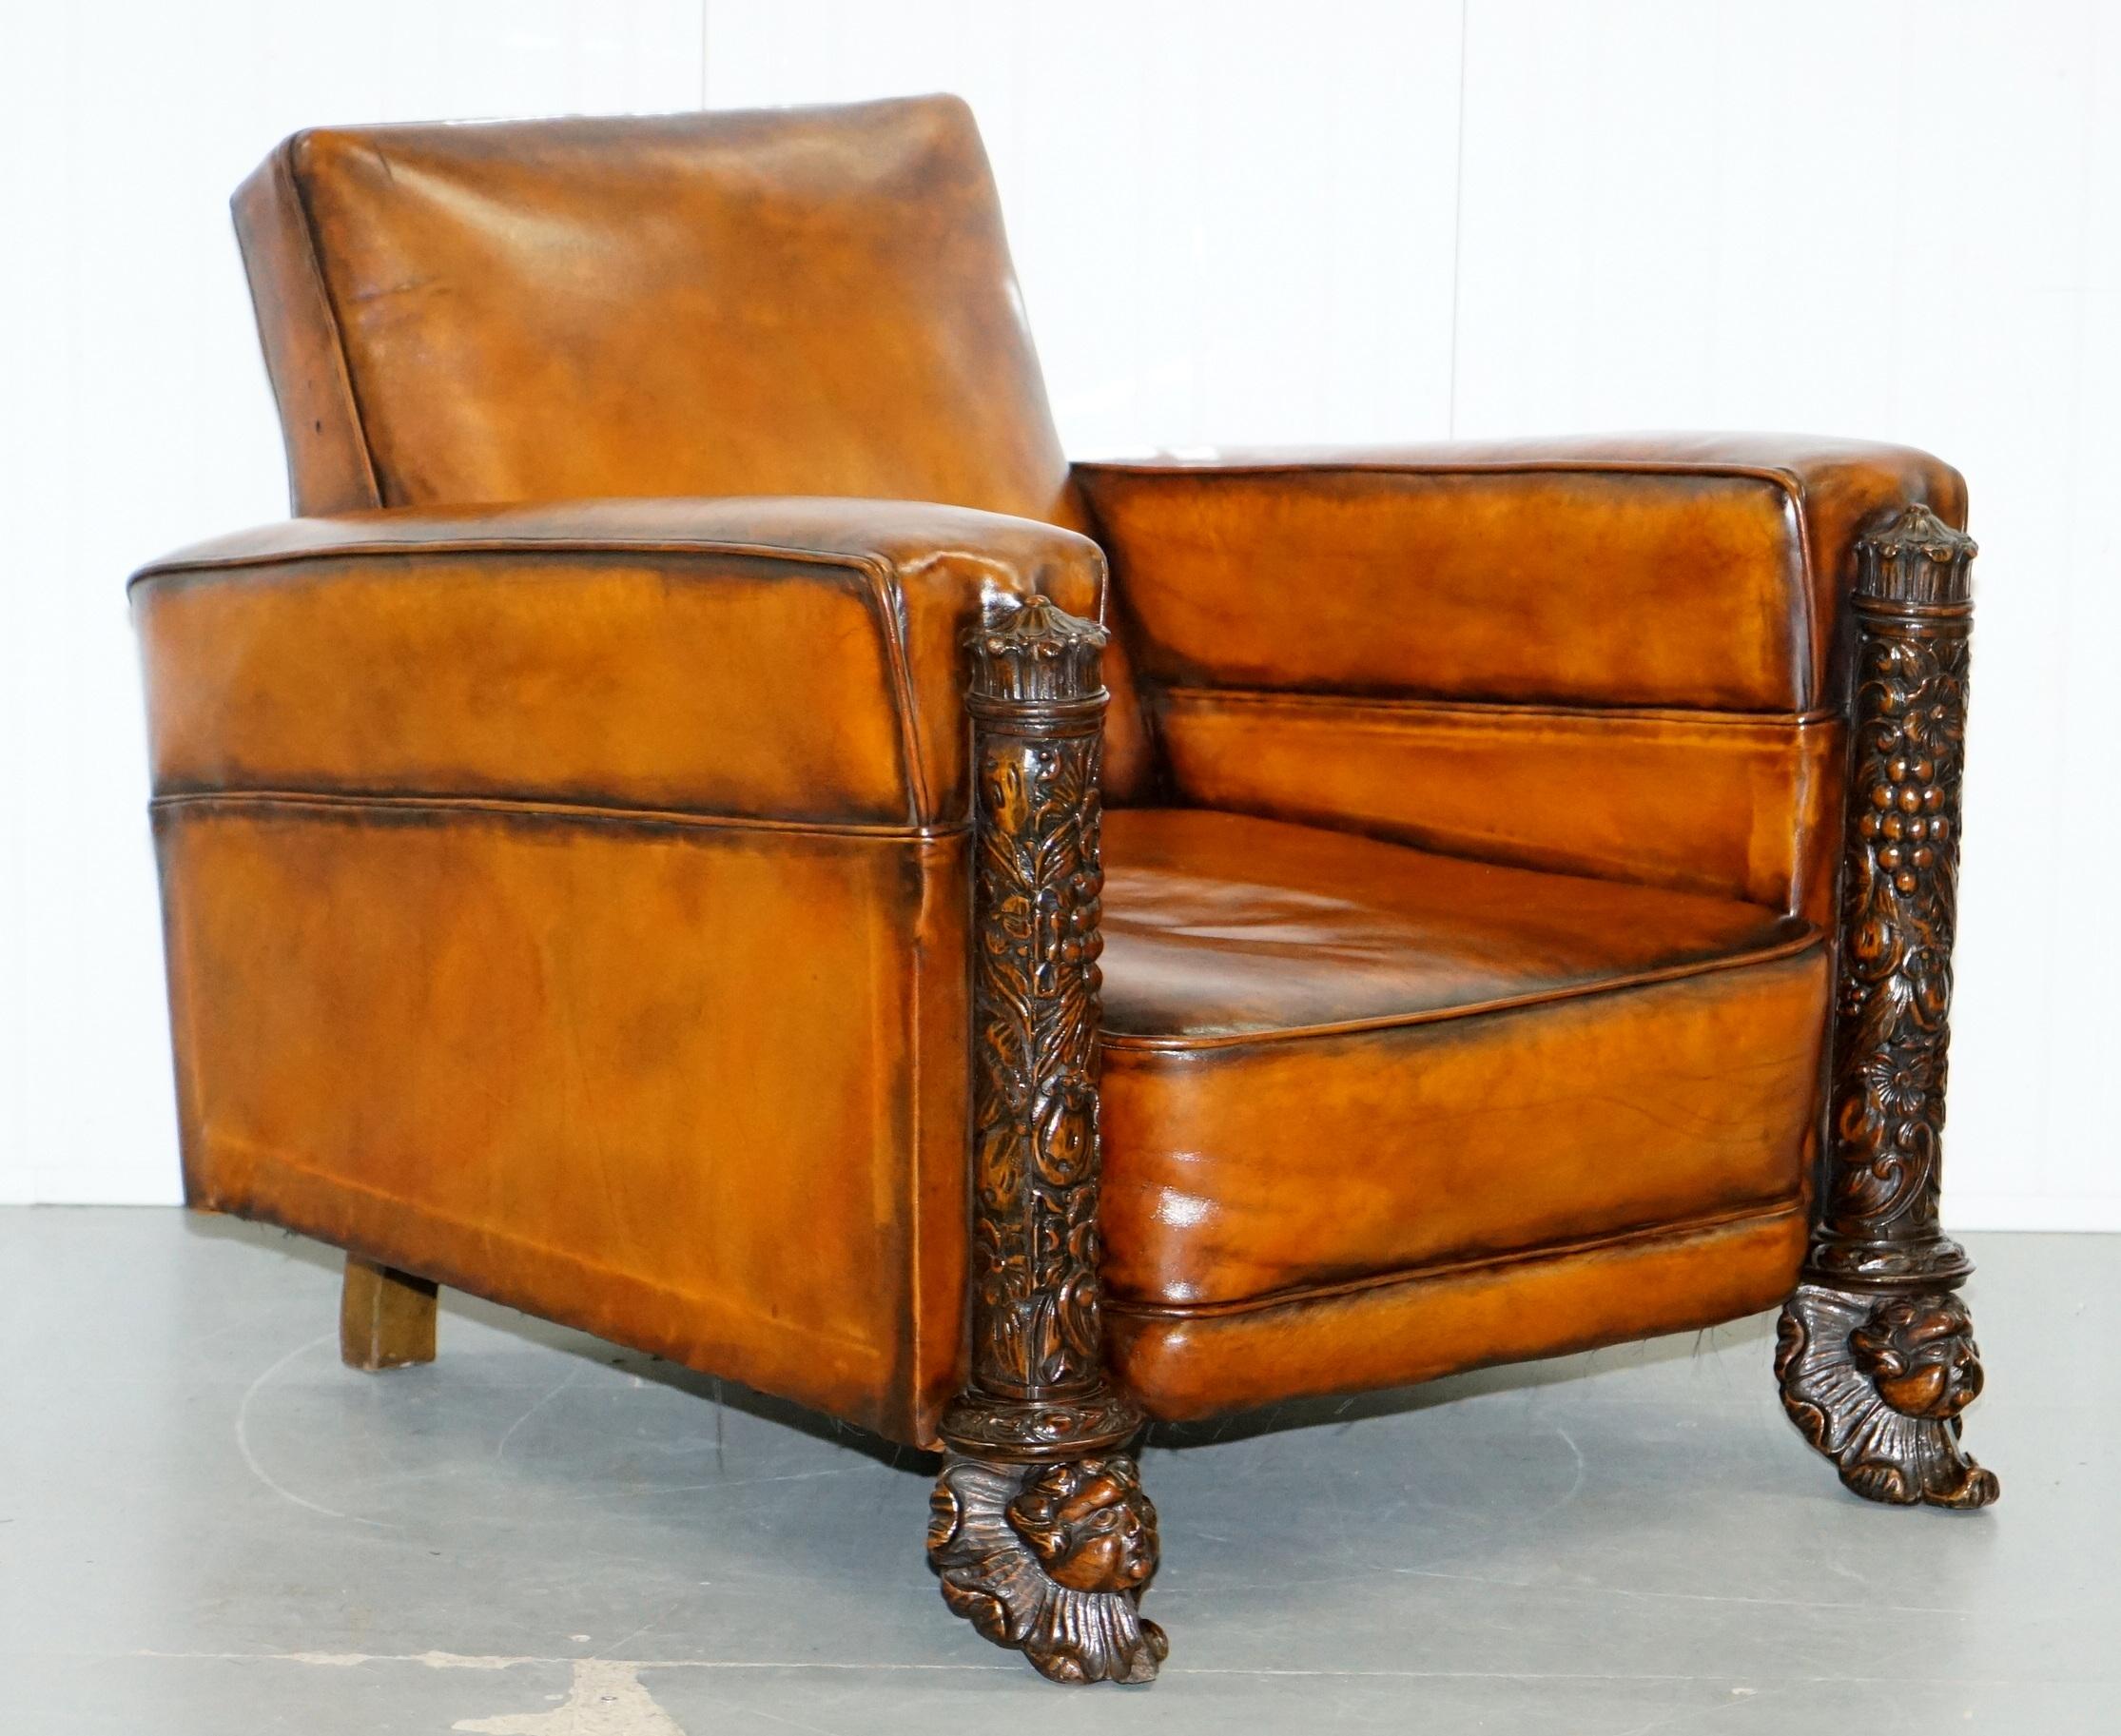 We are delighted to offer for sale this very rare pair of original circa 1860 fully sprung restored aged brown leather club armchairs with 18th century Cherub Putti Angels to the base of floral wrapped pillars.

Never again will these chairs be